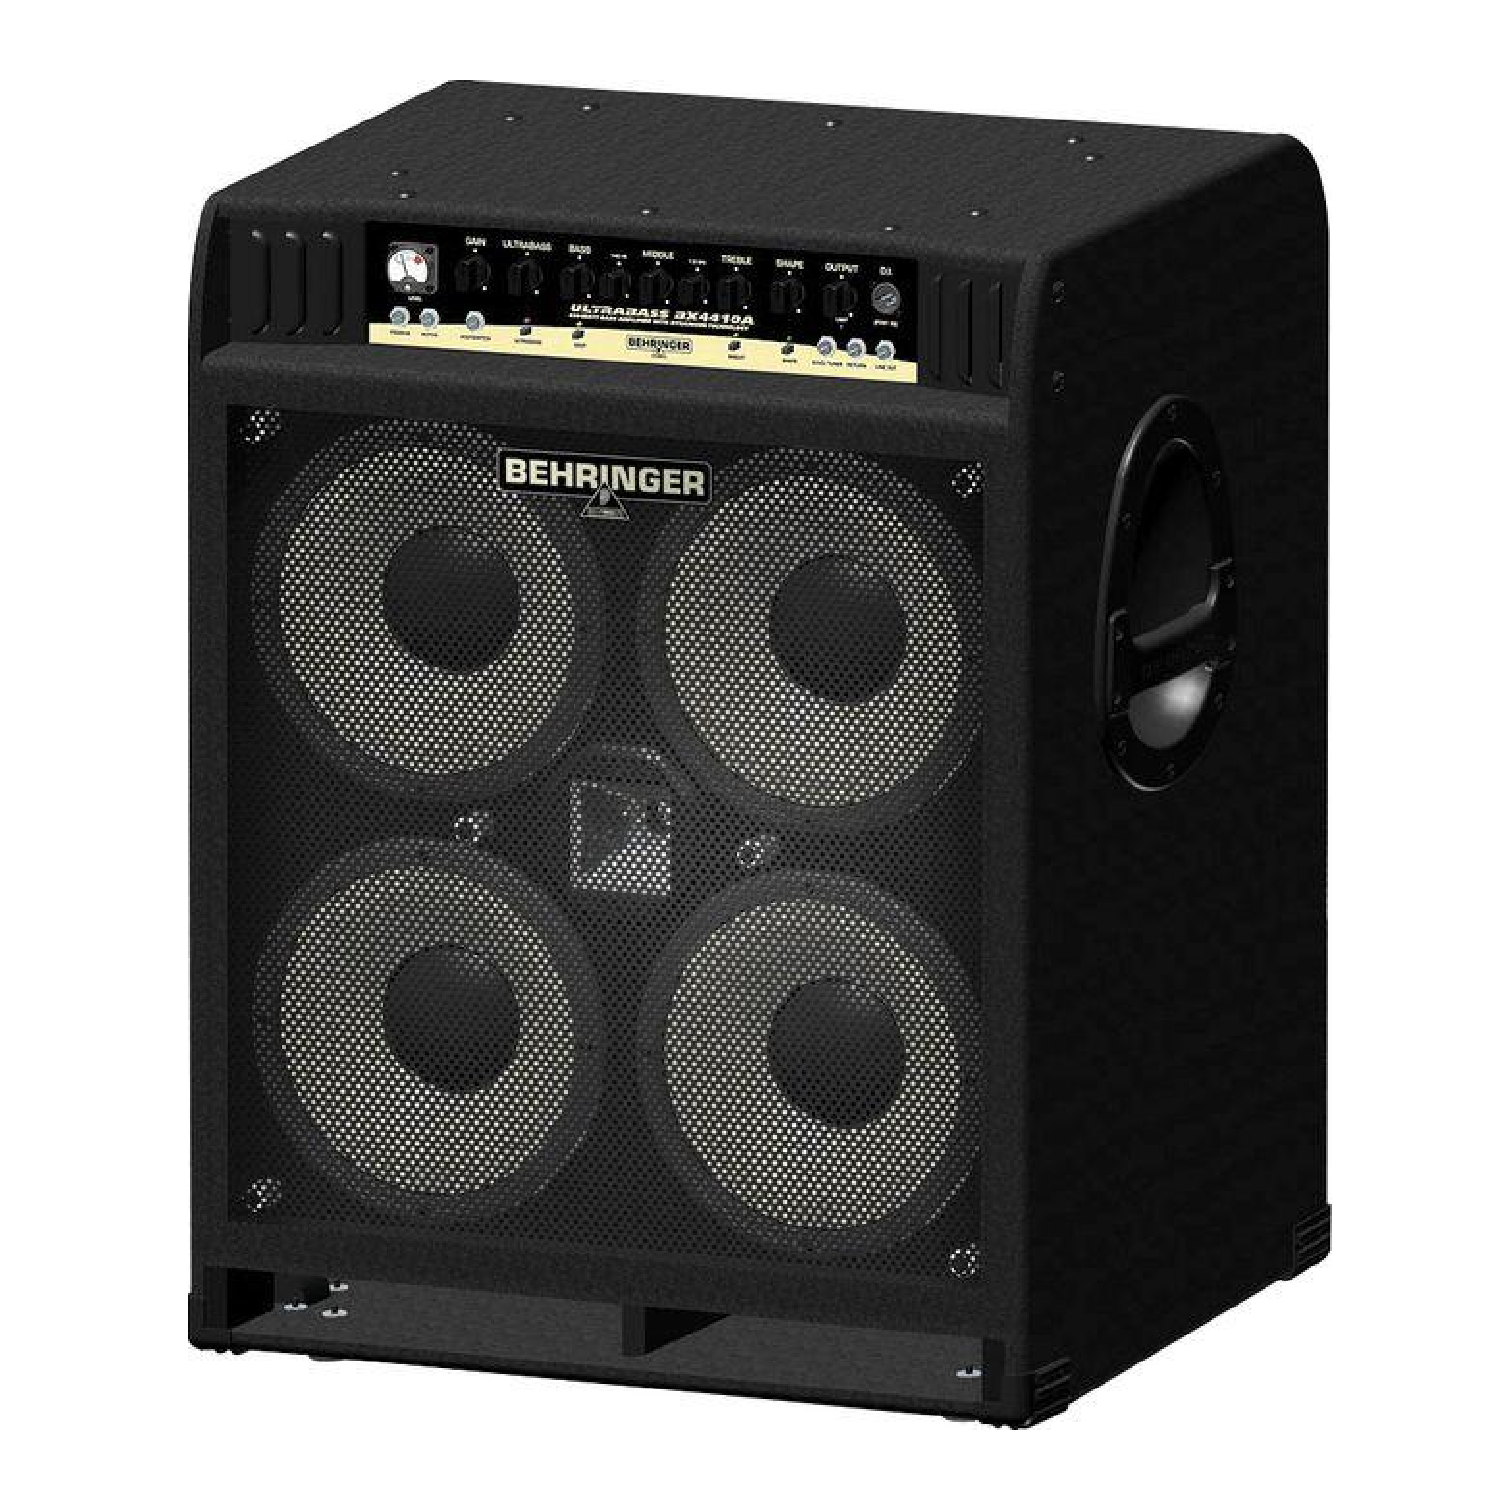 ULTRABASS 450 watt Bass Workstation with 4 Original 10 Inch Speakers and 1 Inch Horn Driver   BX 4410 behringer